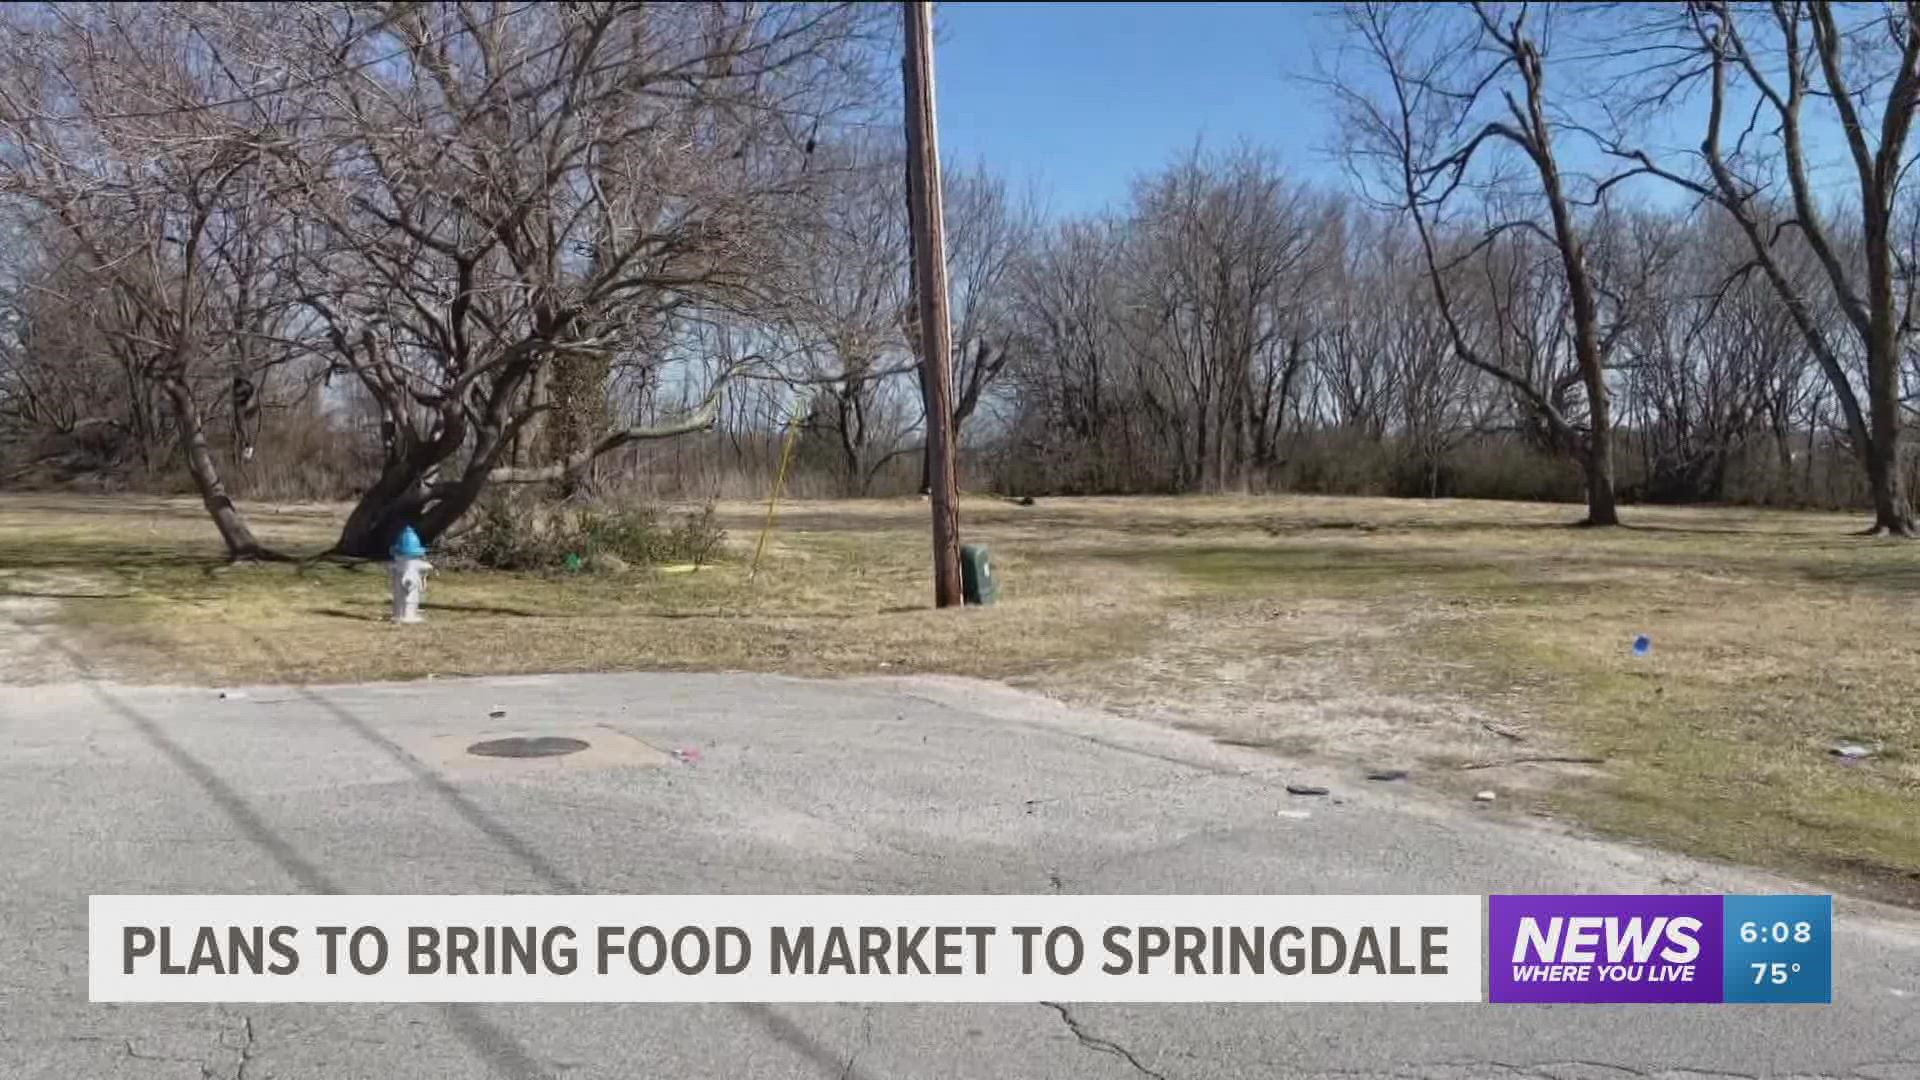 Market Center of the Ozarks will be located in downtown Springdale and provide crop aggregation capabilities, commercial kitchens and community spaces for learning.